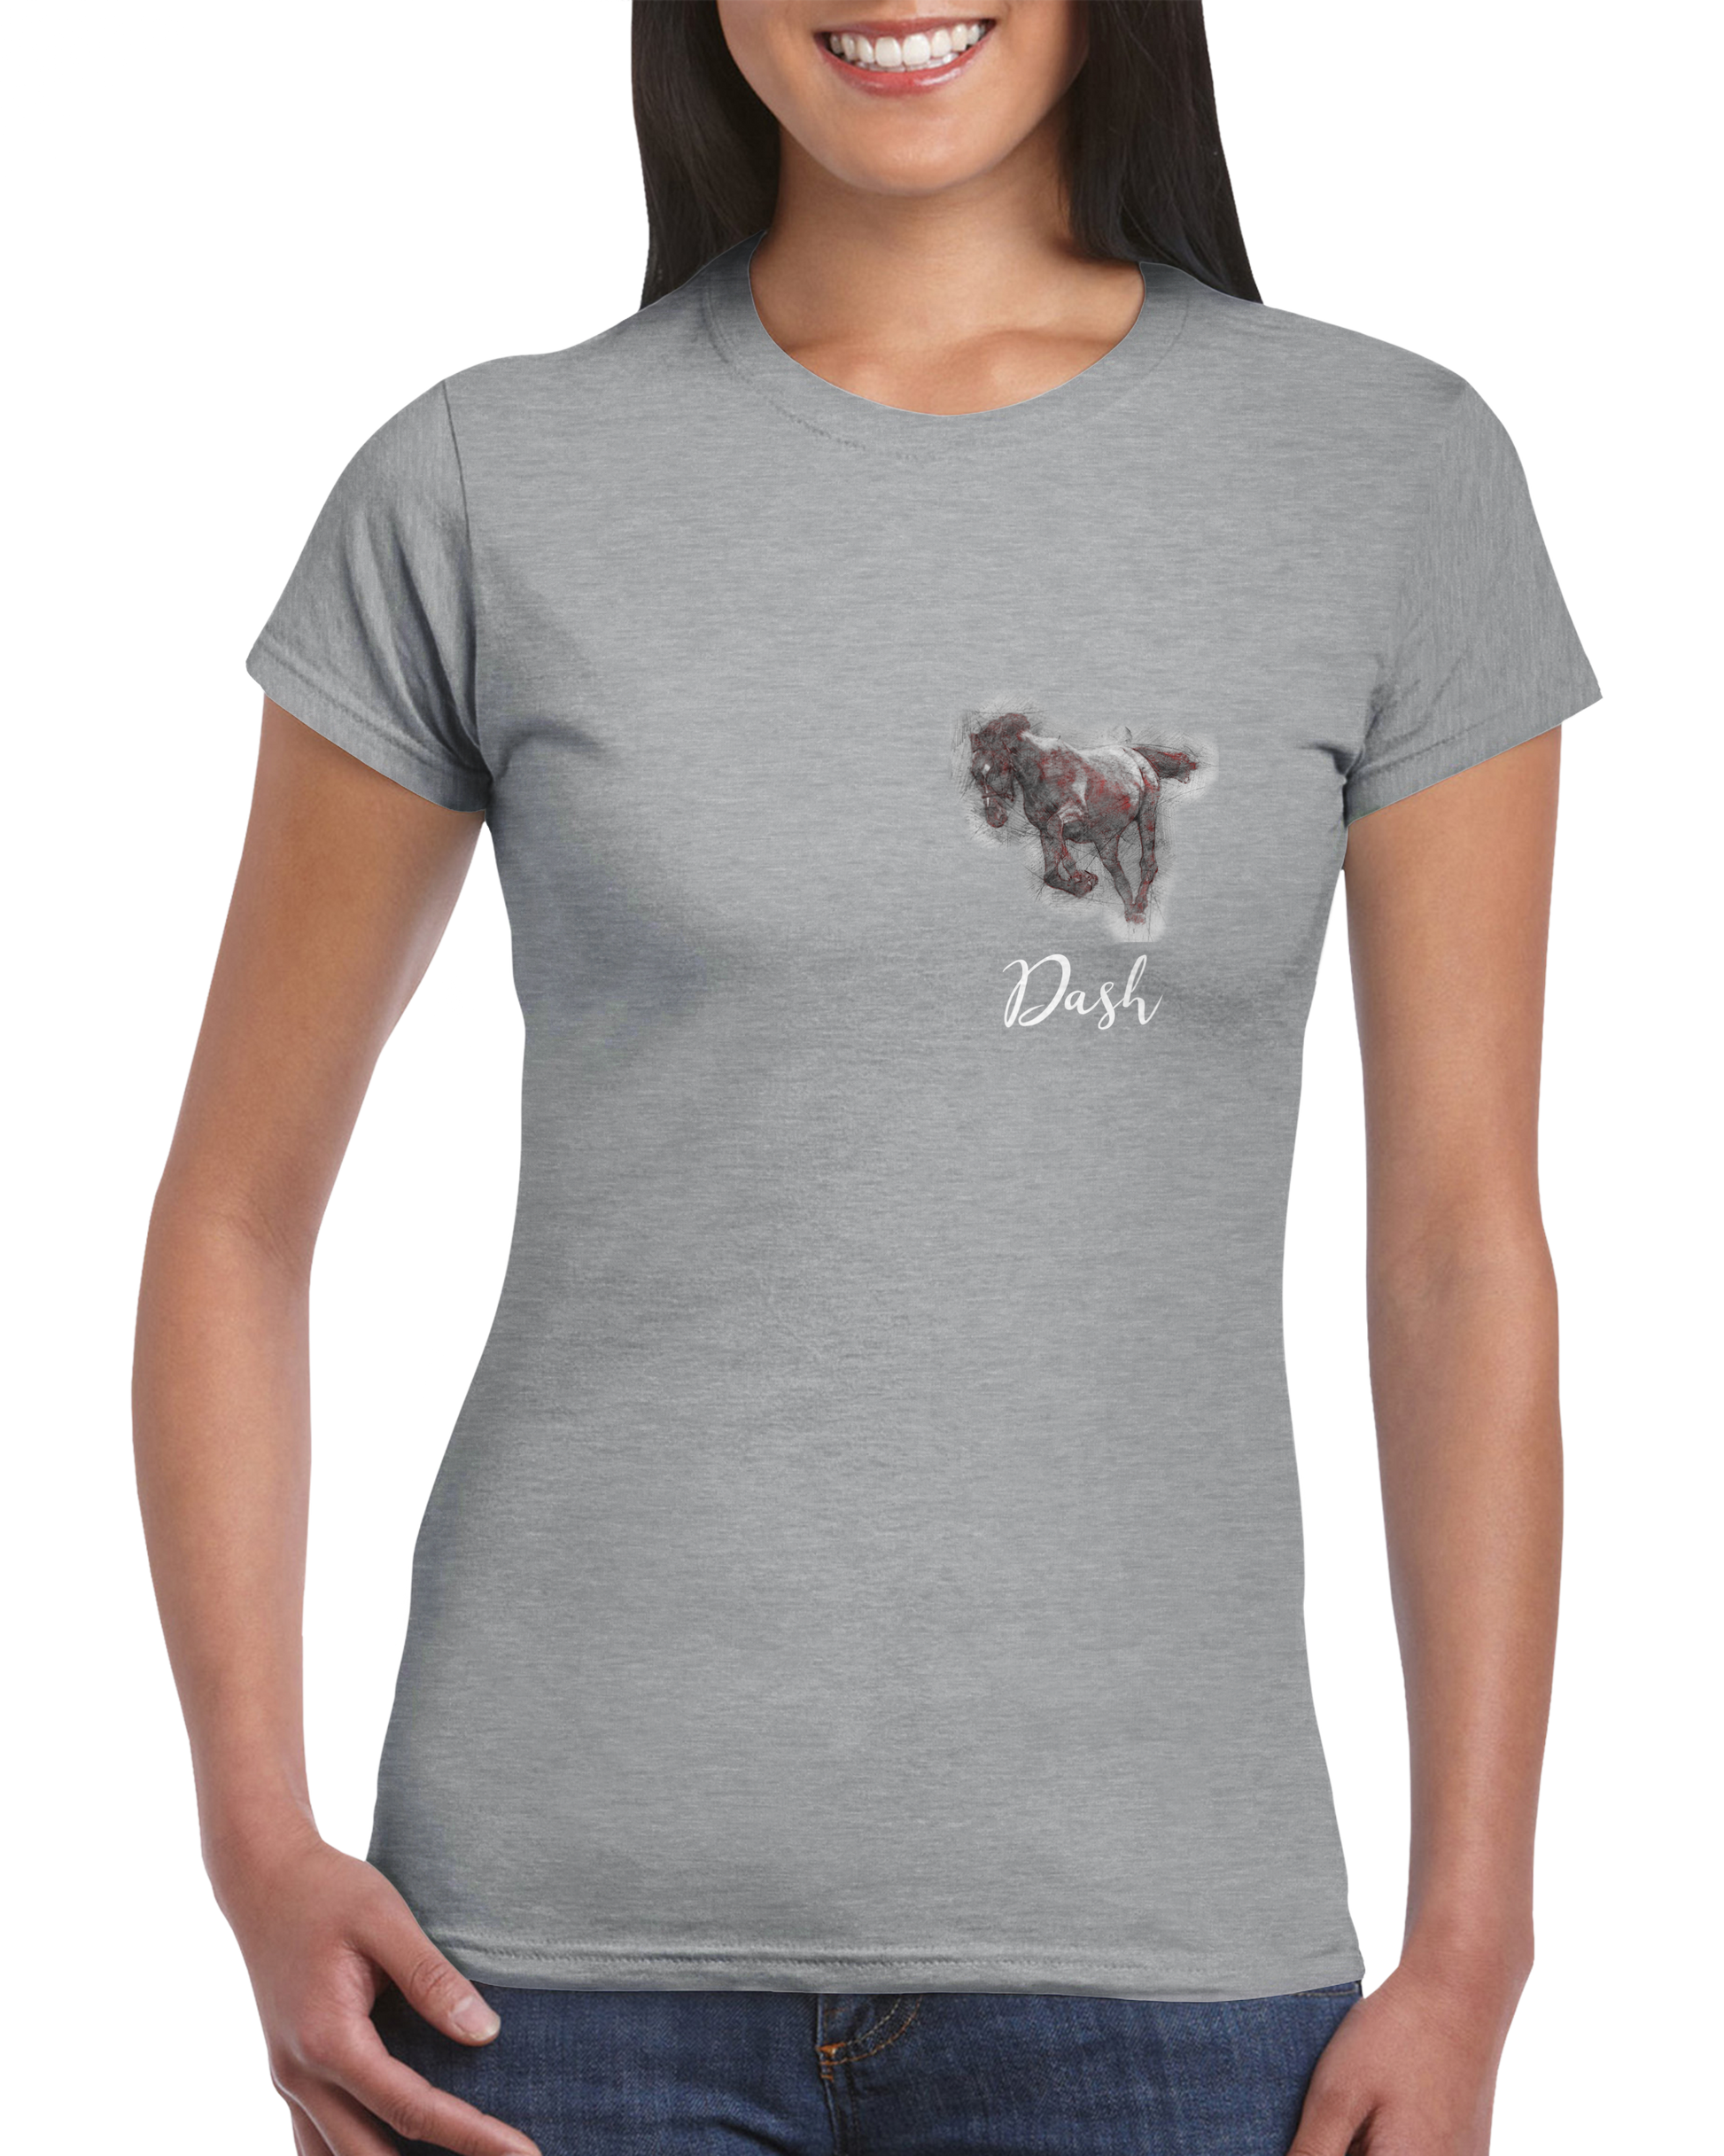 Hand Drawn Horse || Women's Crewneck T-shirt - Pencil Drawing - Personalized; Personalized with your horse